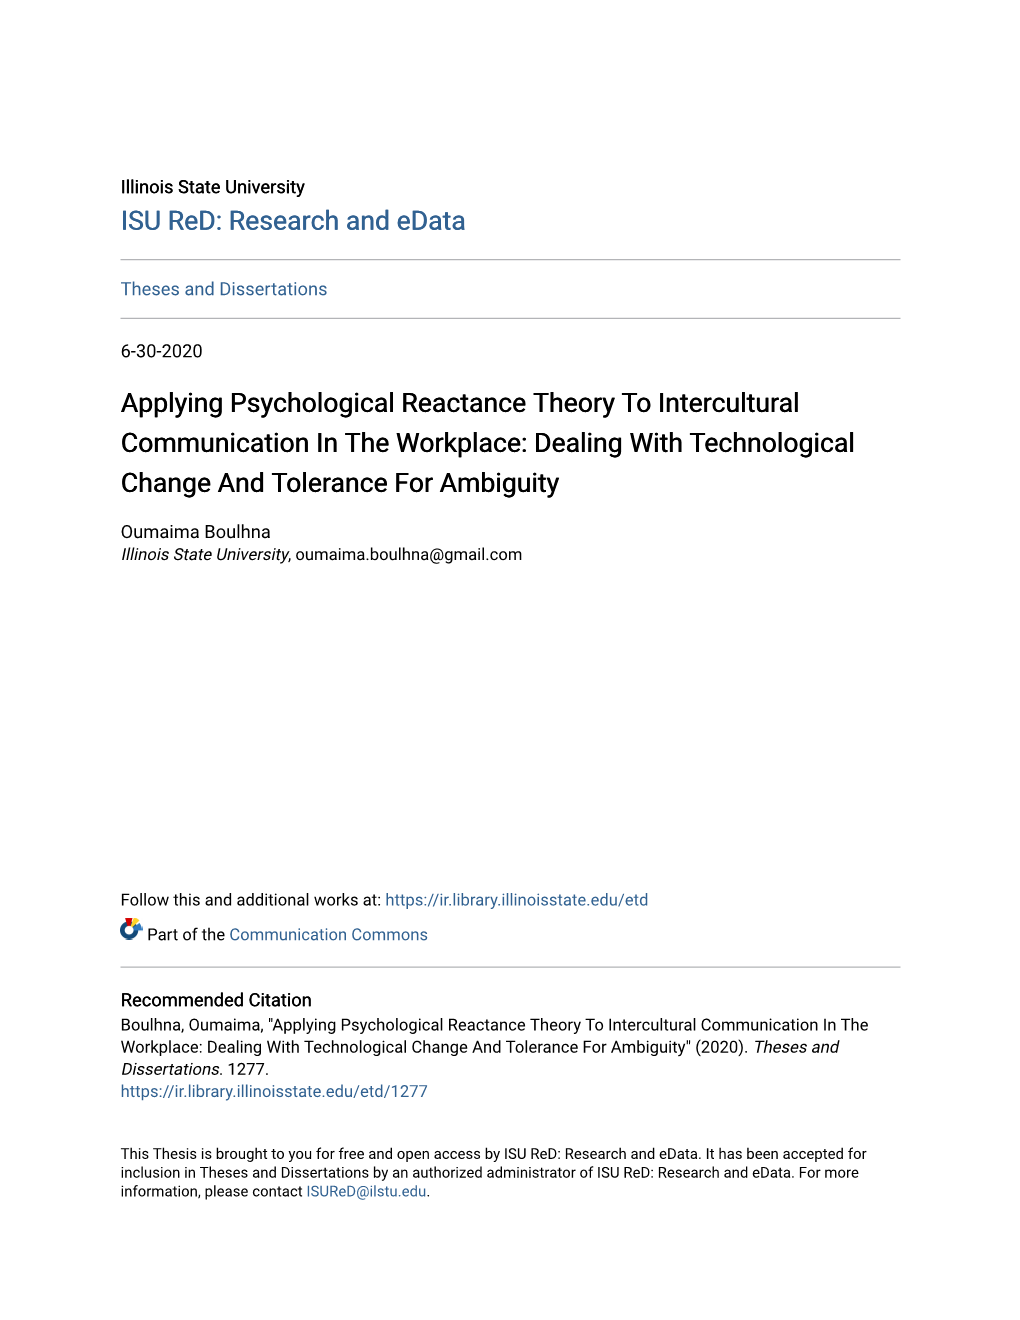 Applying Psychological Reactance Theory to Intercultural Communication in the Workplace: Dealing with Technological Change and Tolerance for Ambiguity